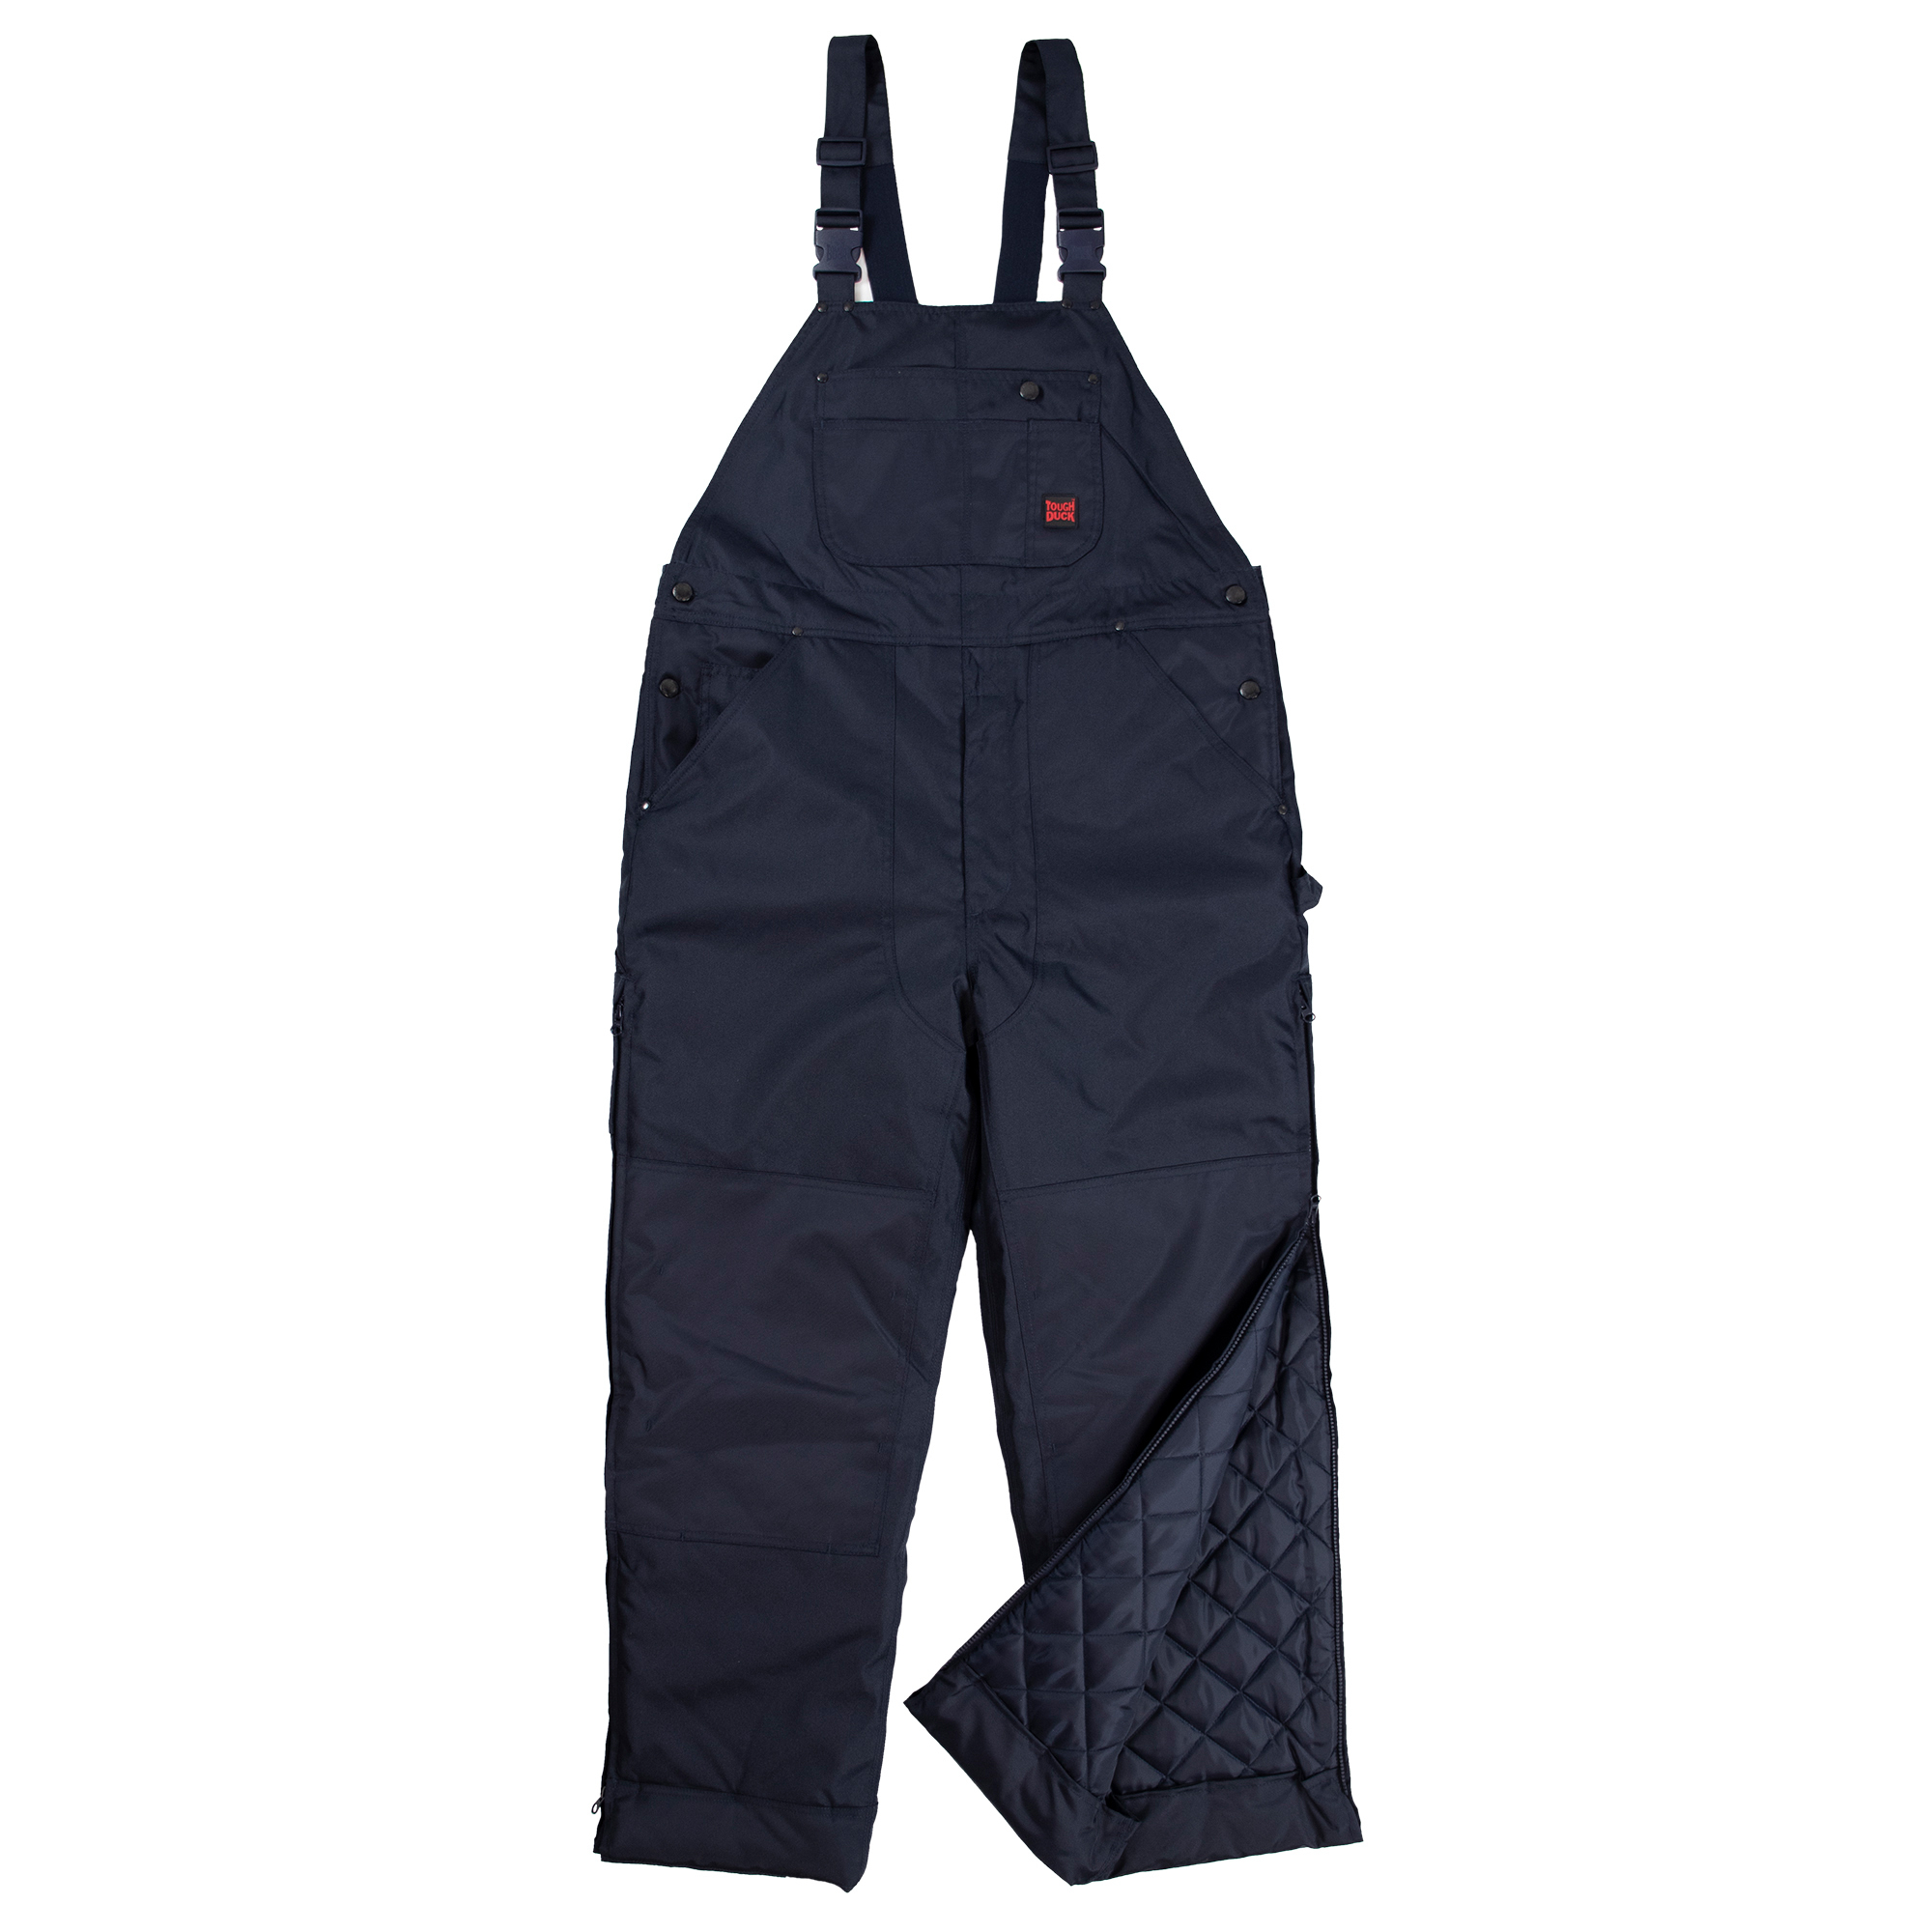 Tough Duck, Insulated Bib Overall, Size L, Color Navy, Model 791016